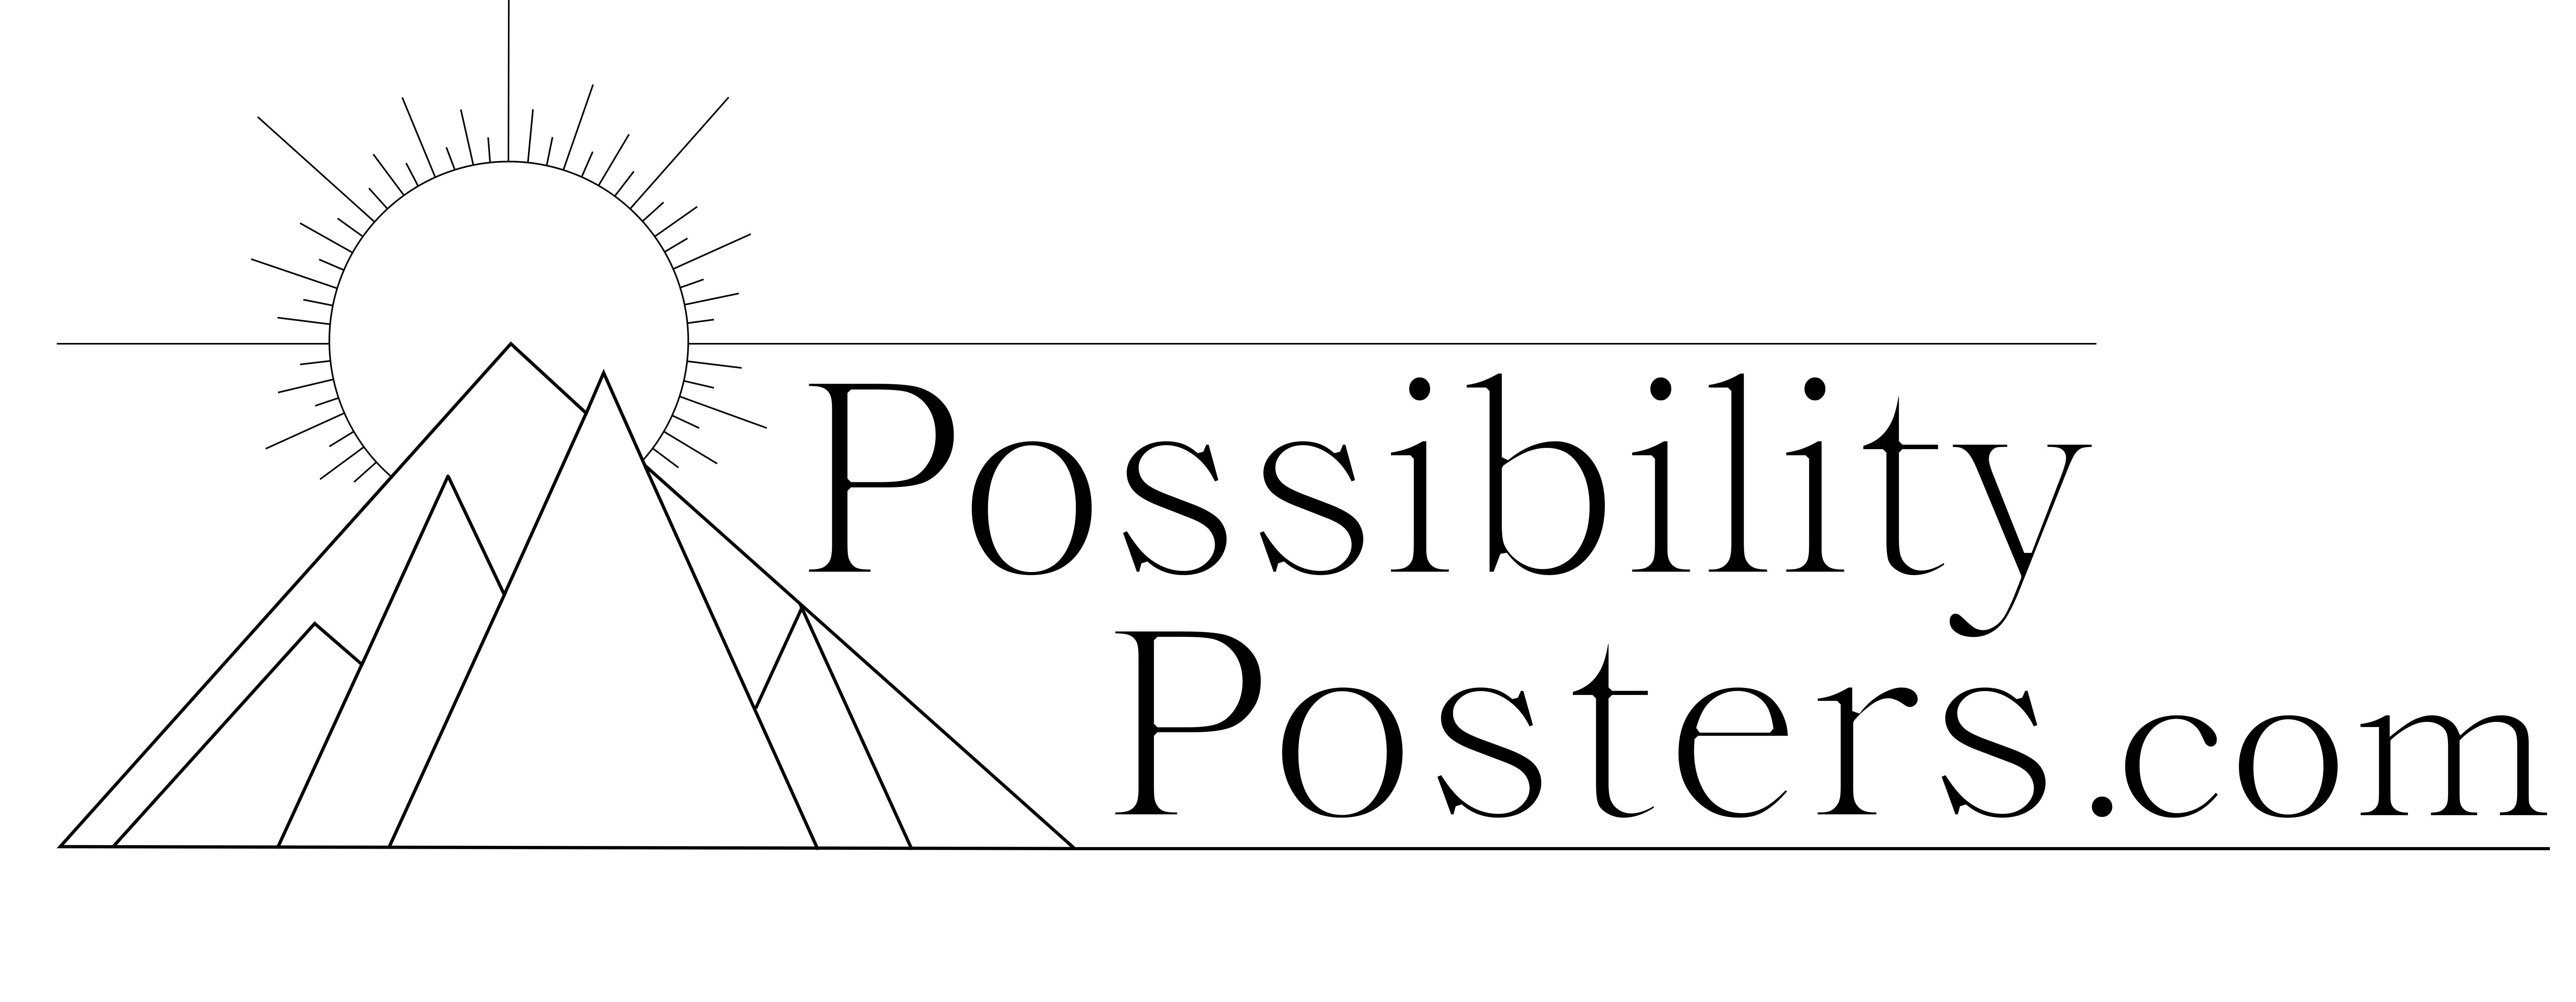  POSSIBILITY POSTERS.COM